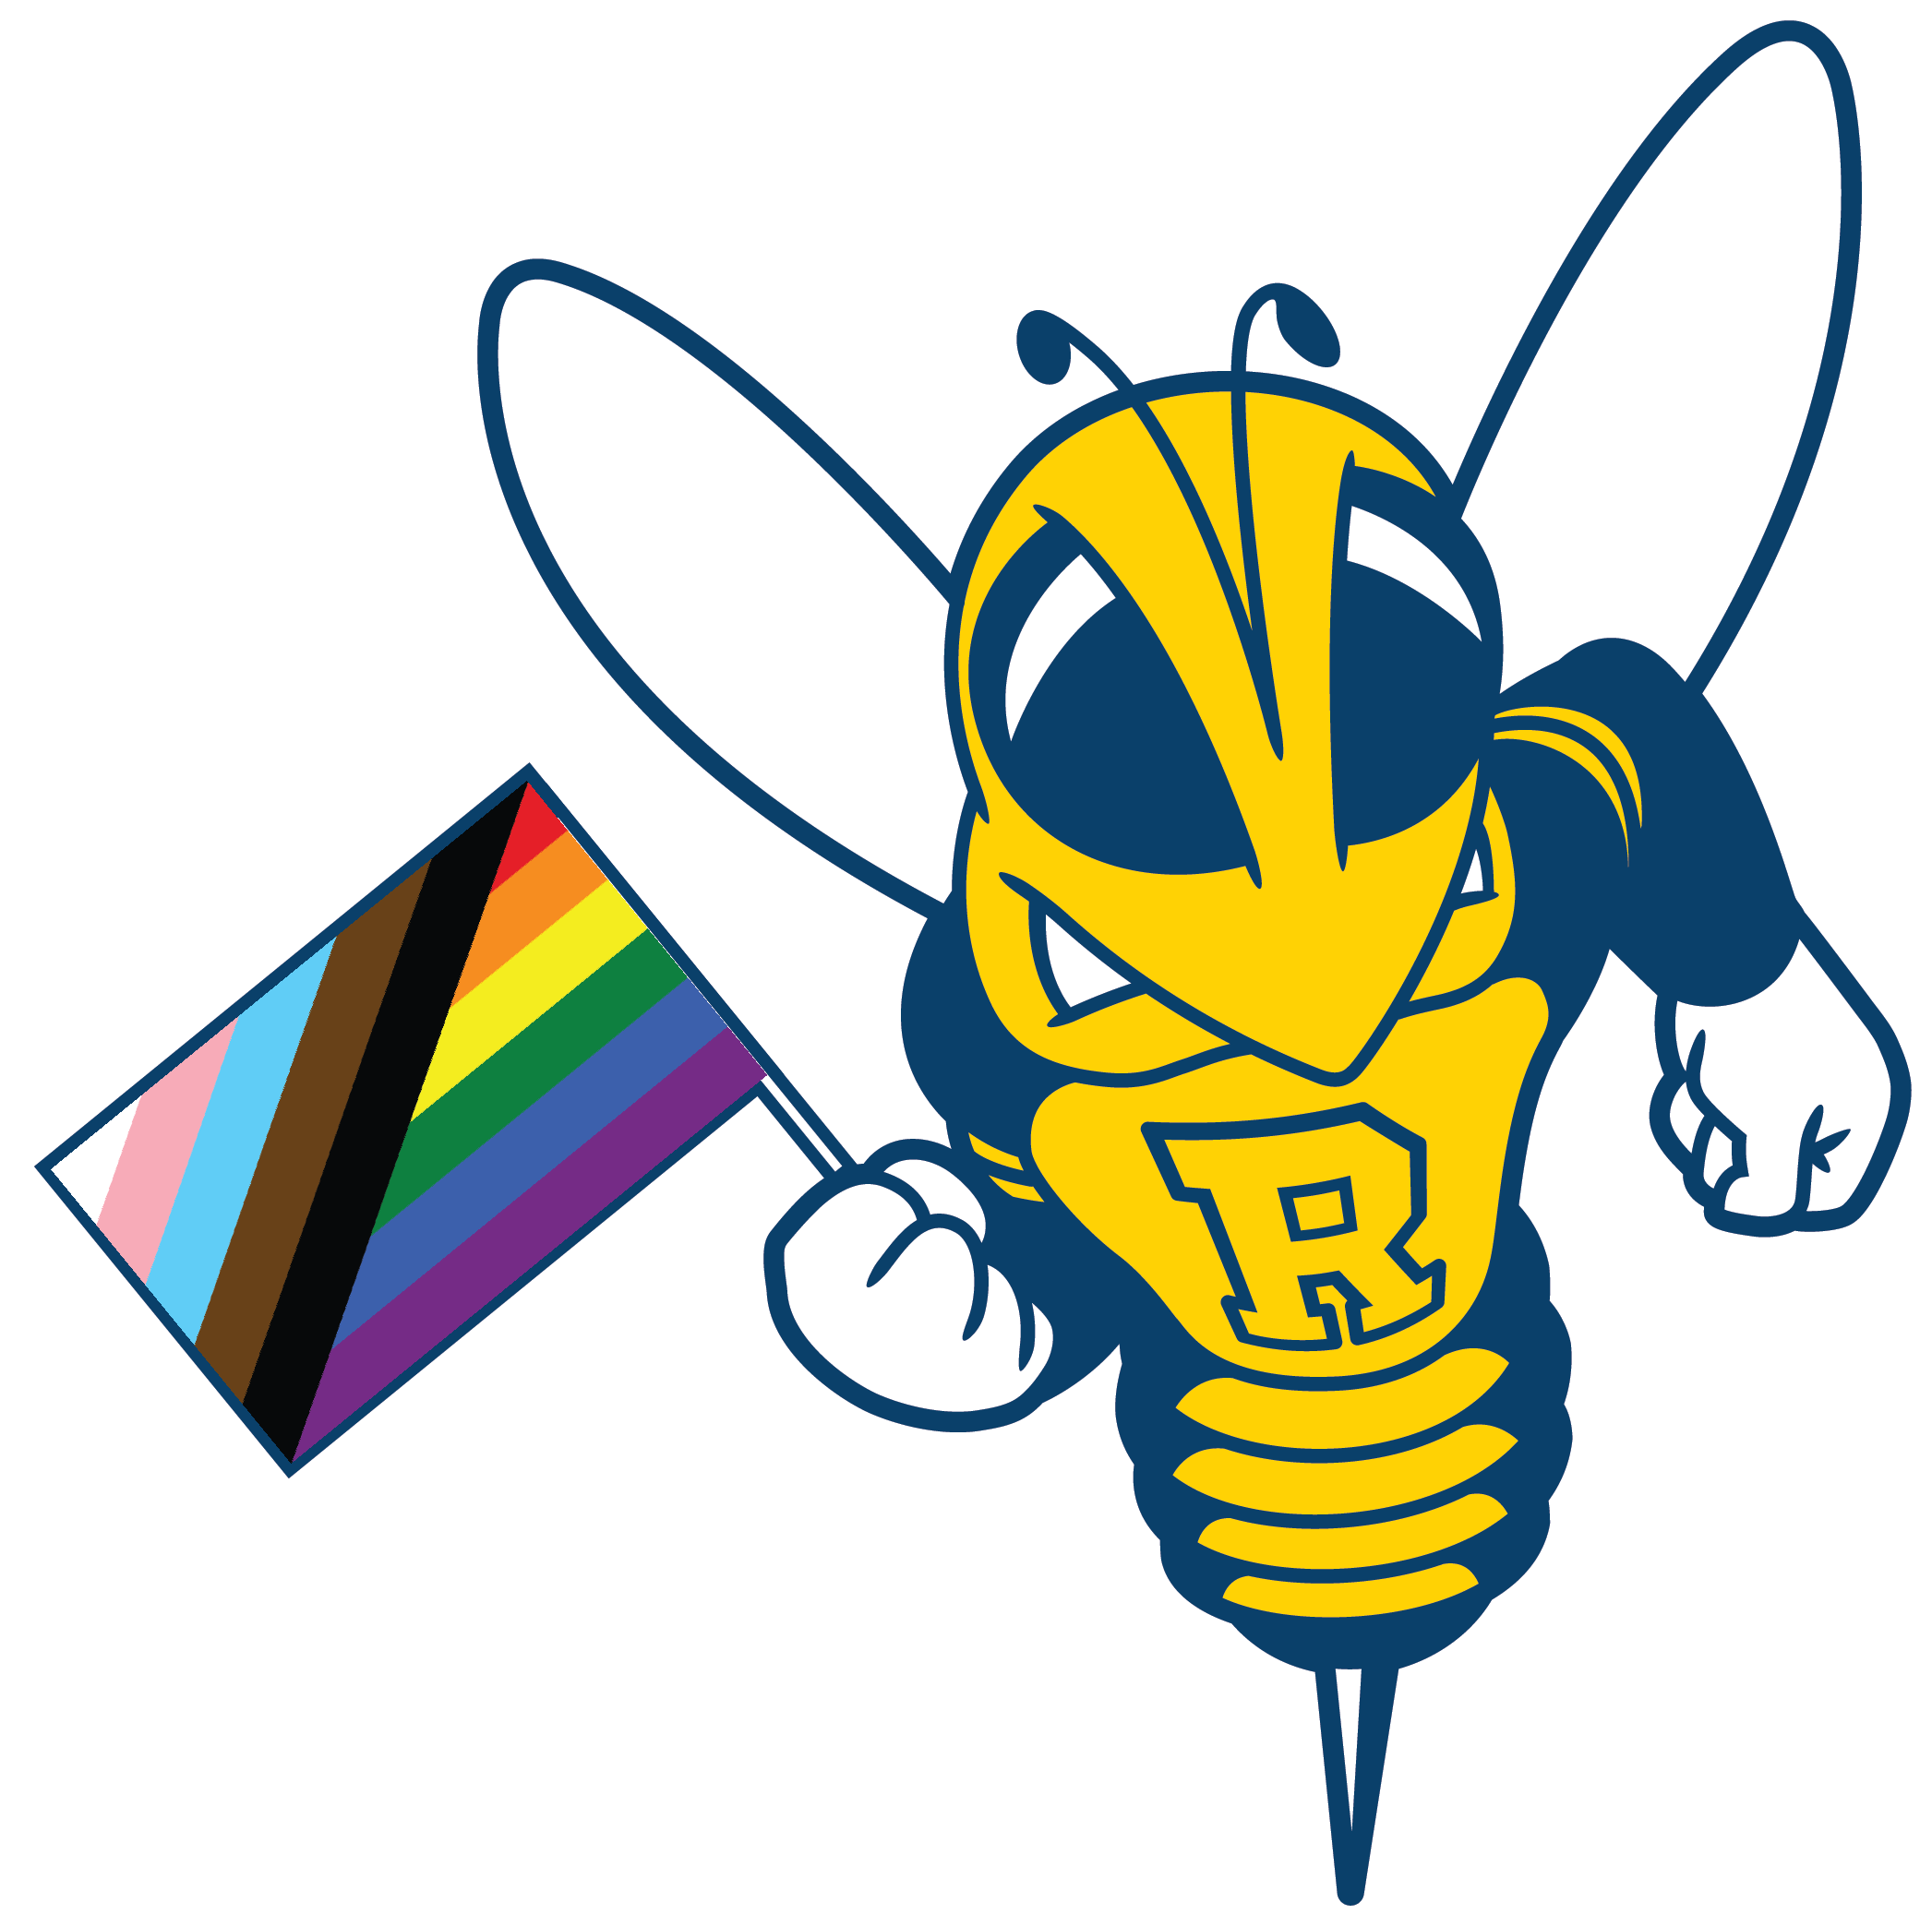 An illustration of the school mascot holding a pride flag.